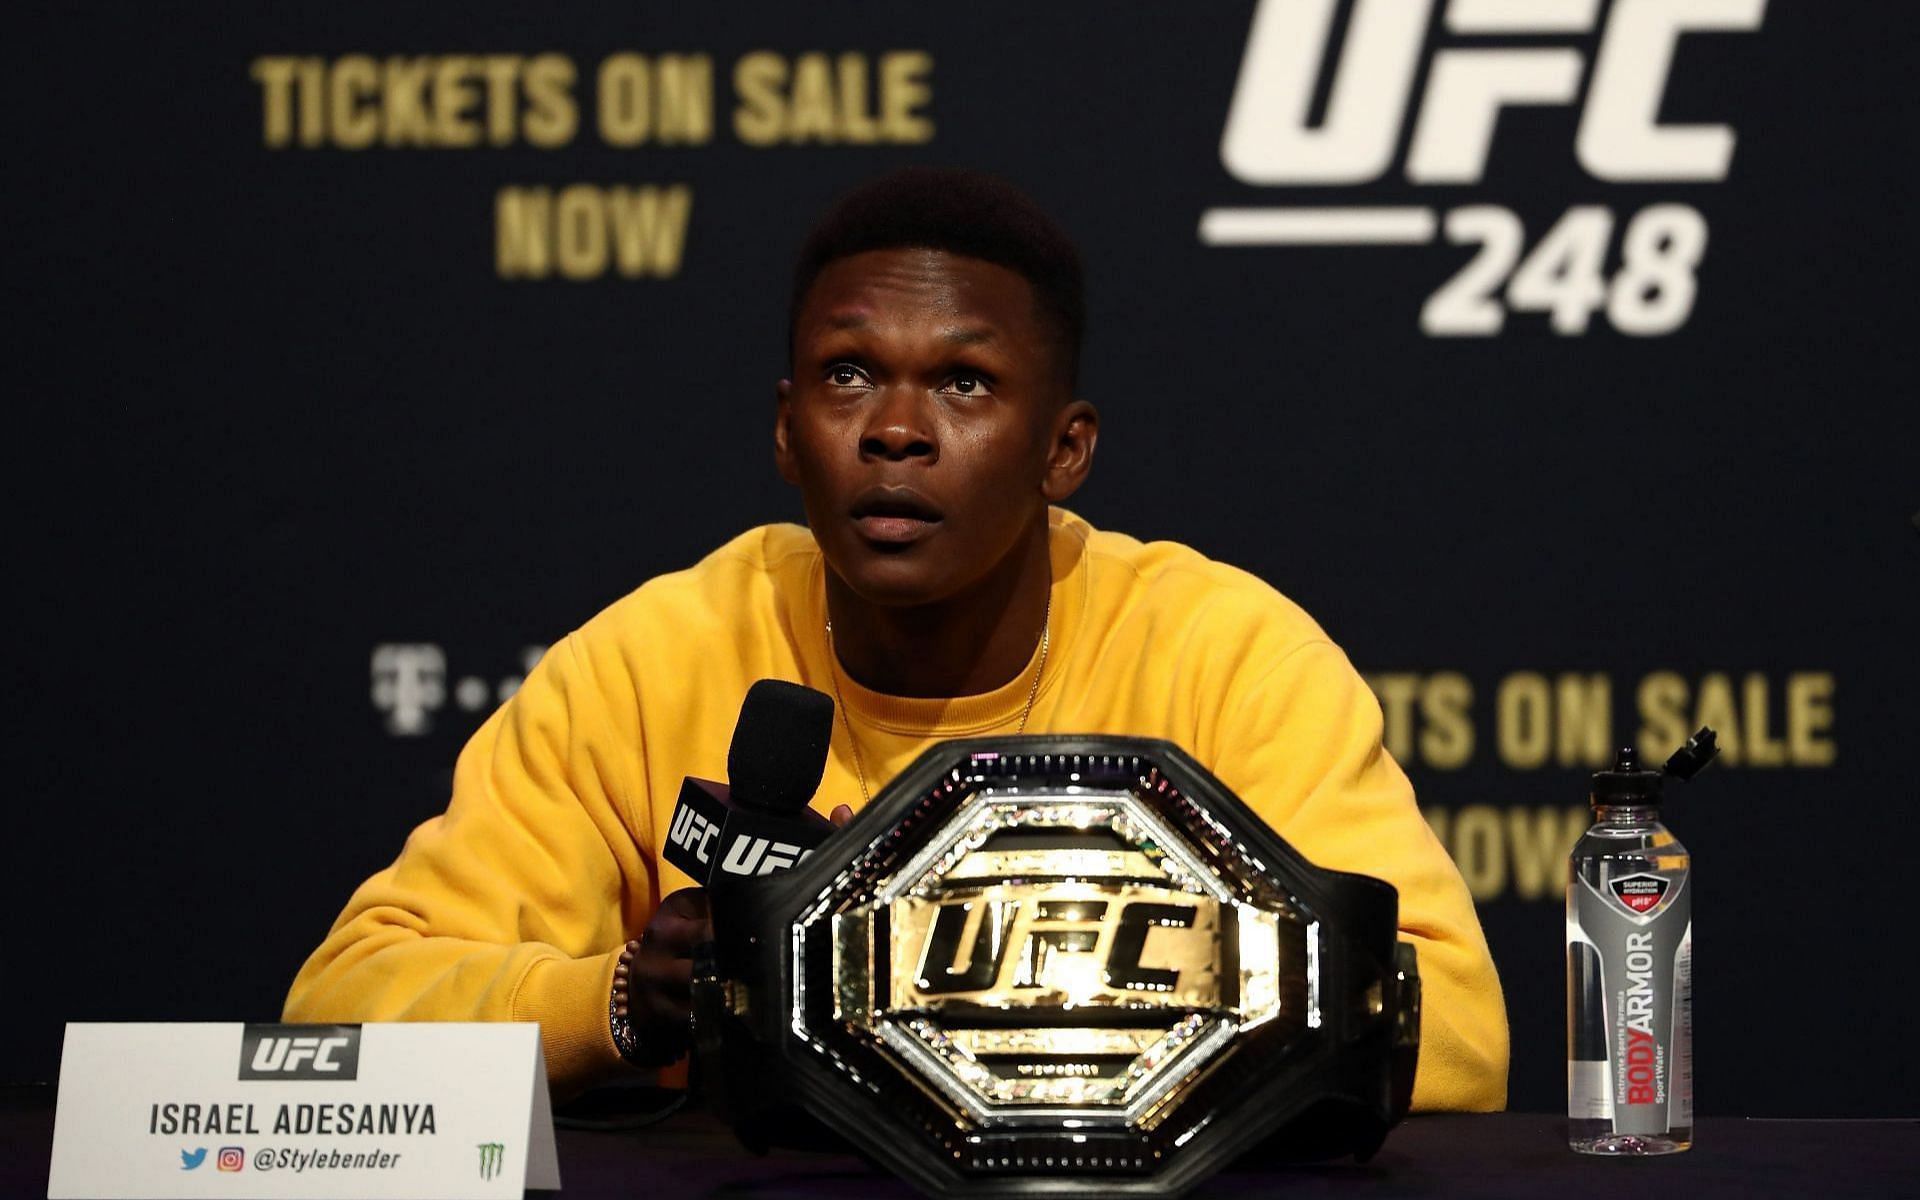 Israel Adesanya preparing for questions prior to UFC 248